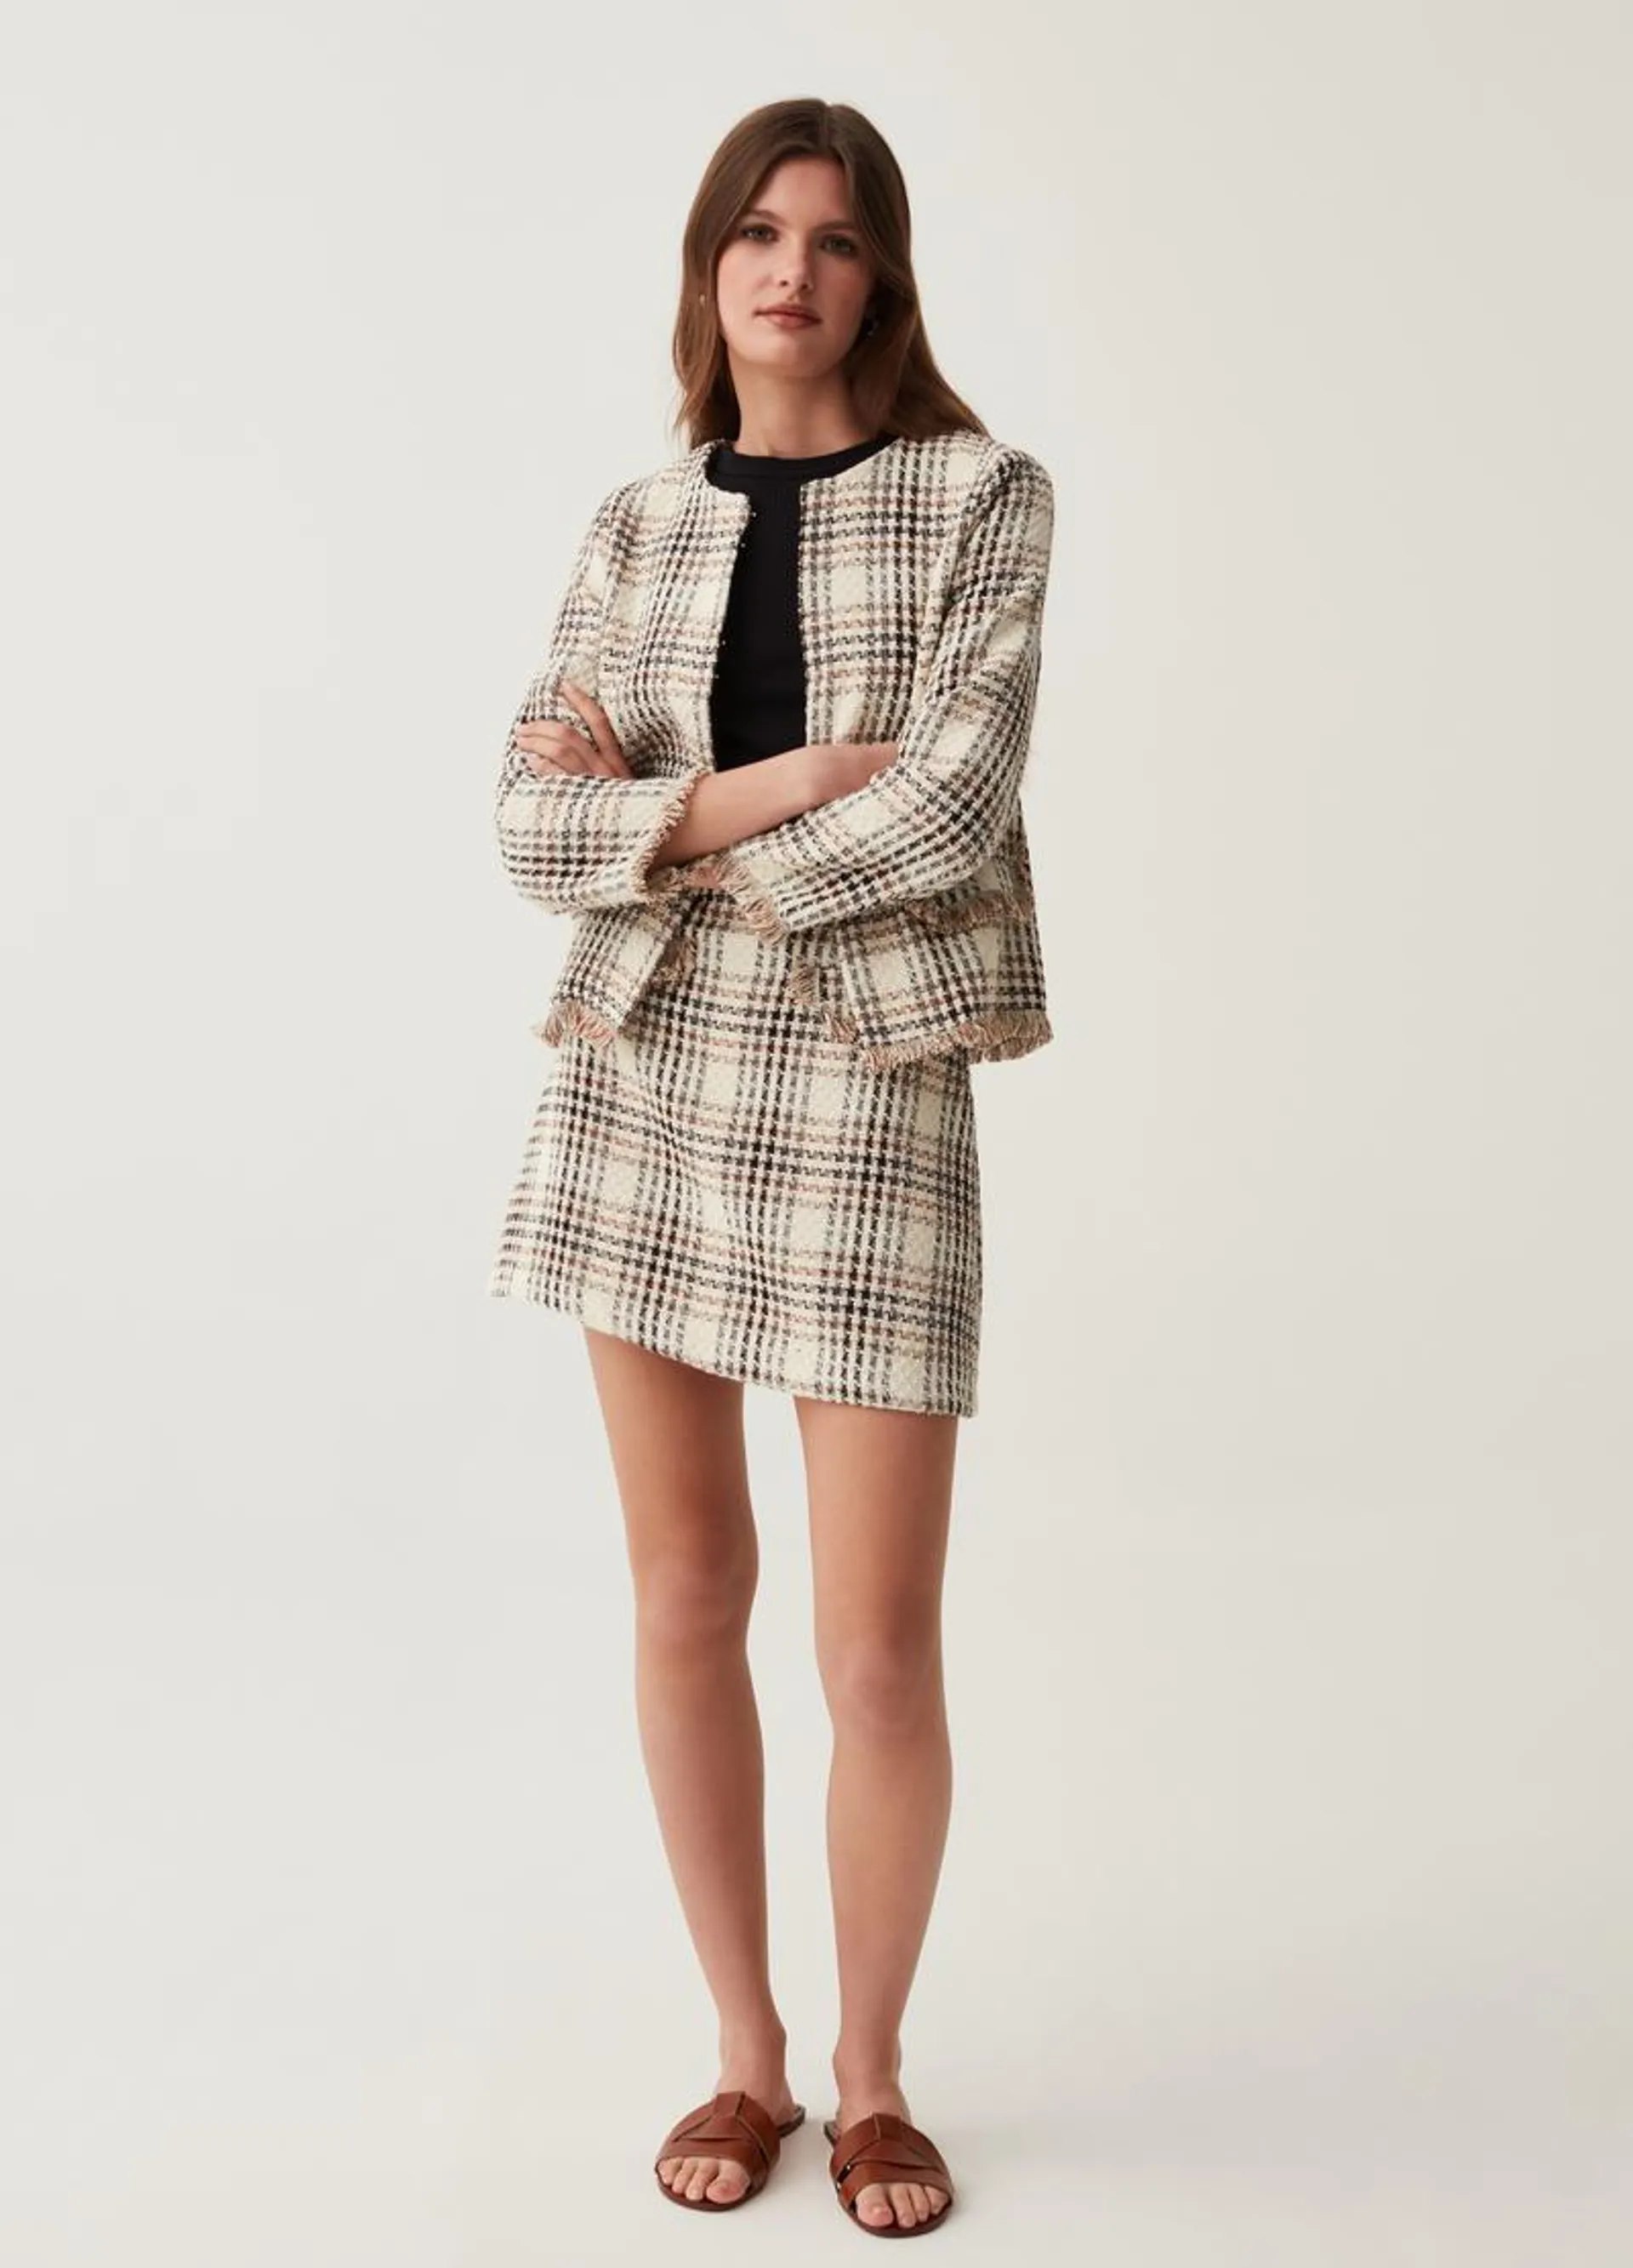 Tweed-effect miniskirt with check pattern.